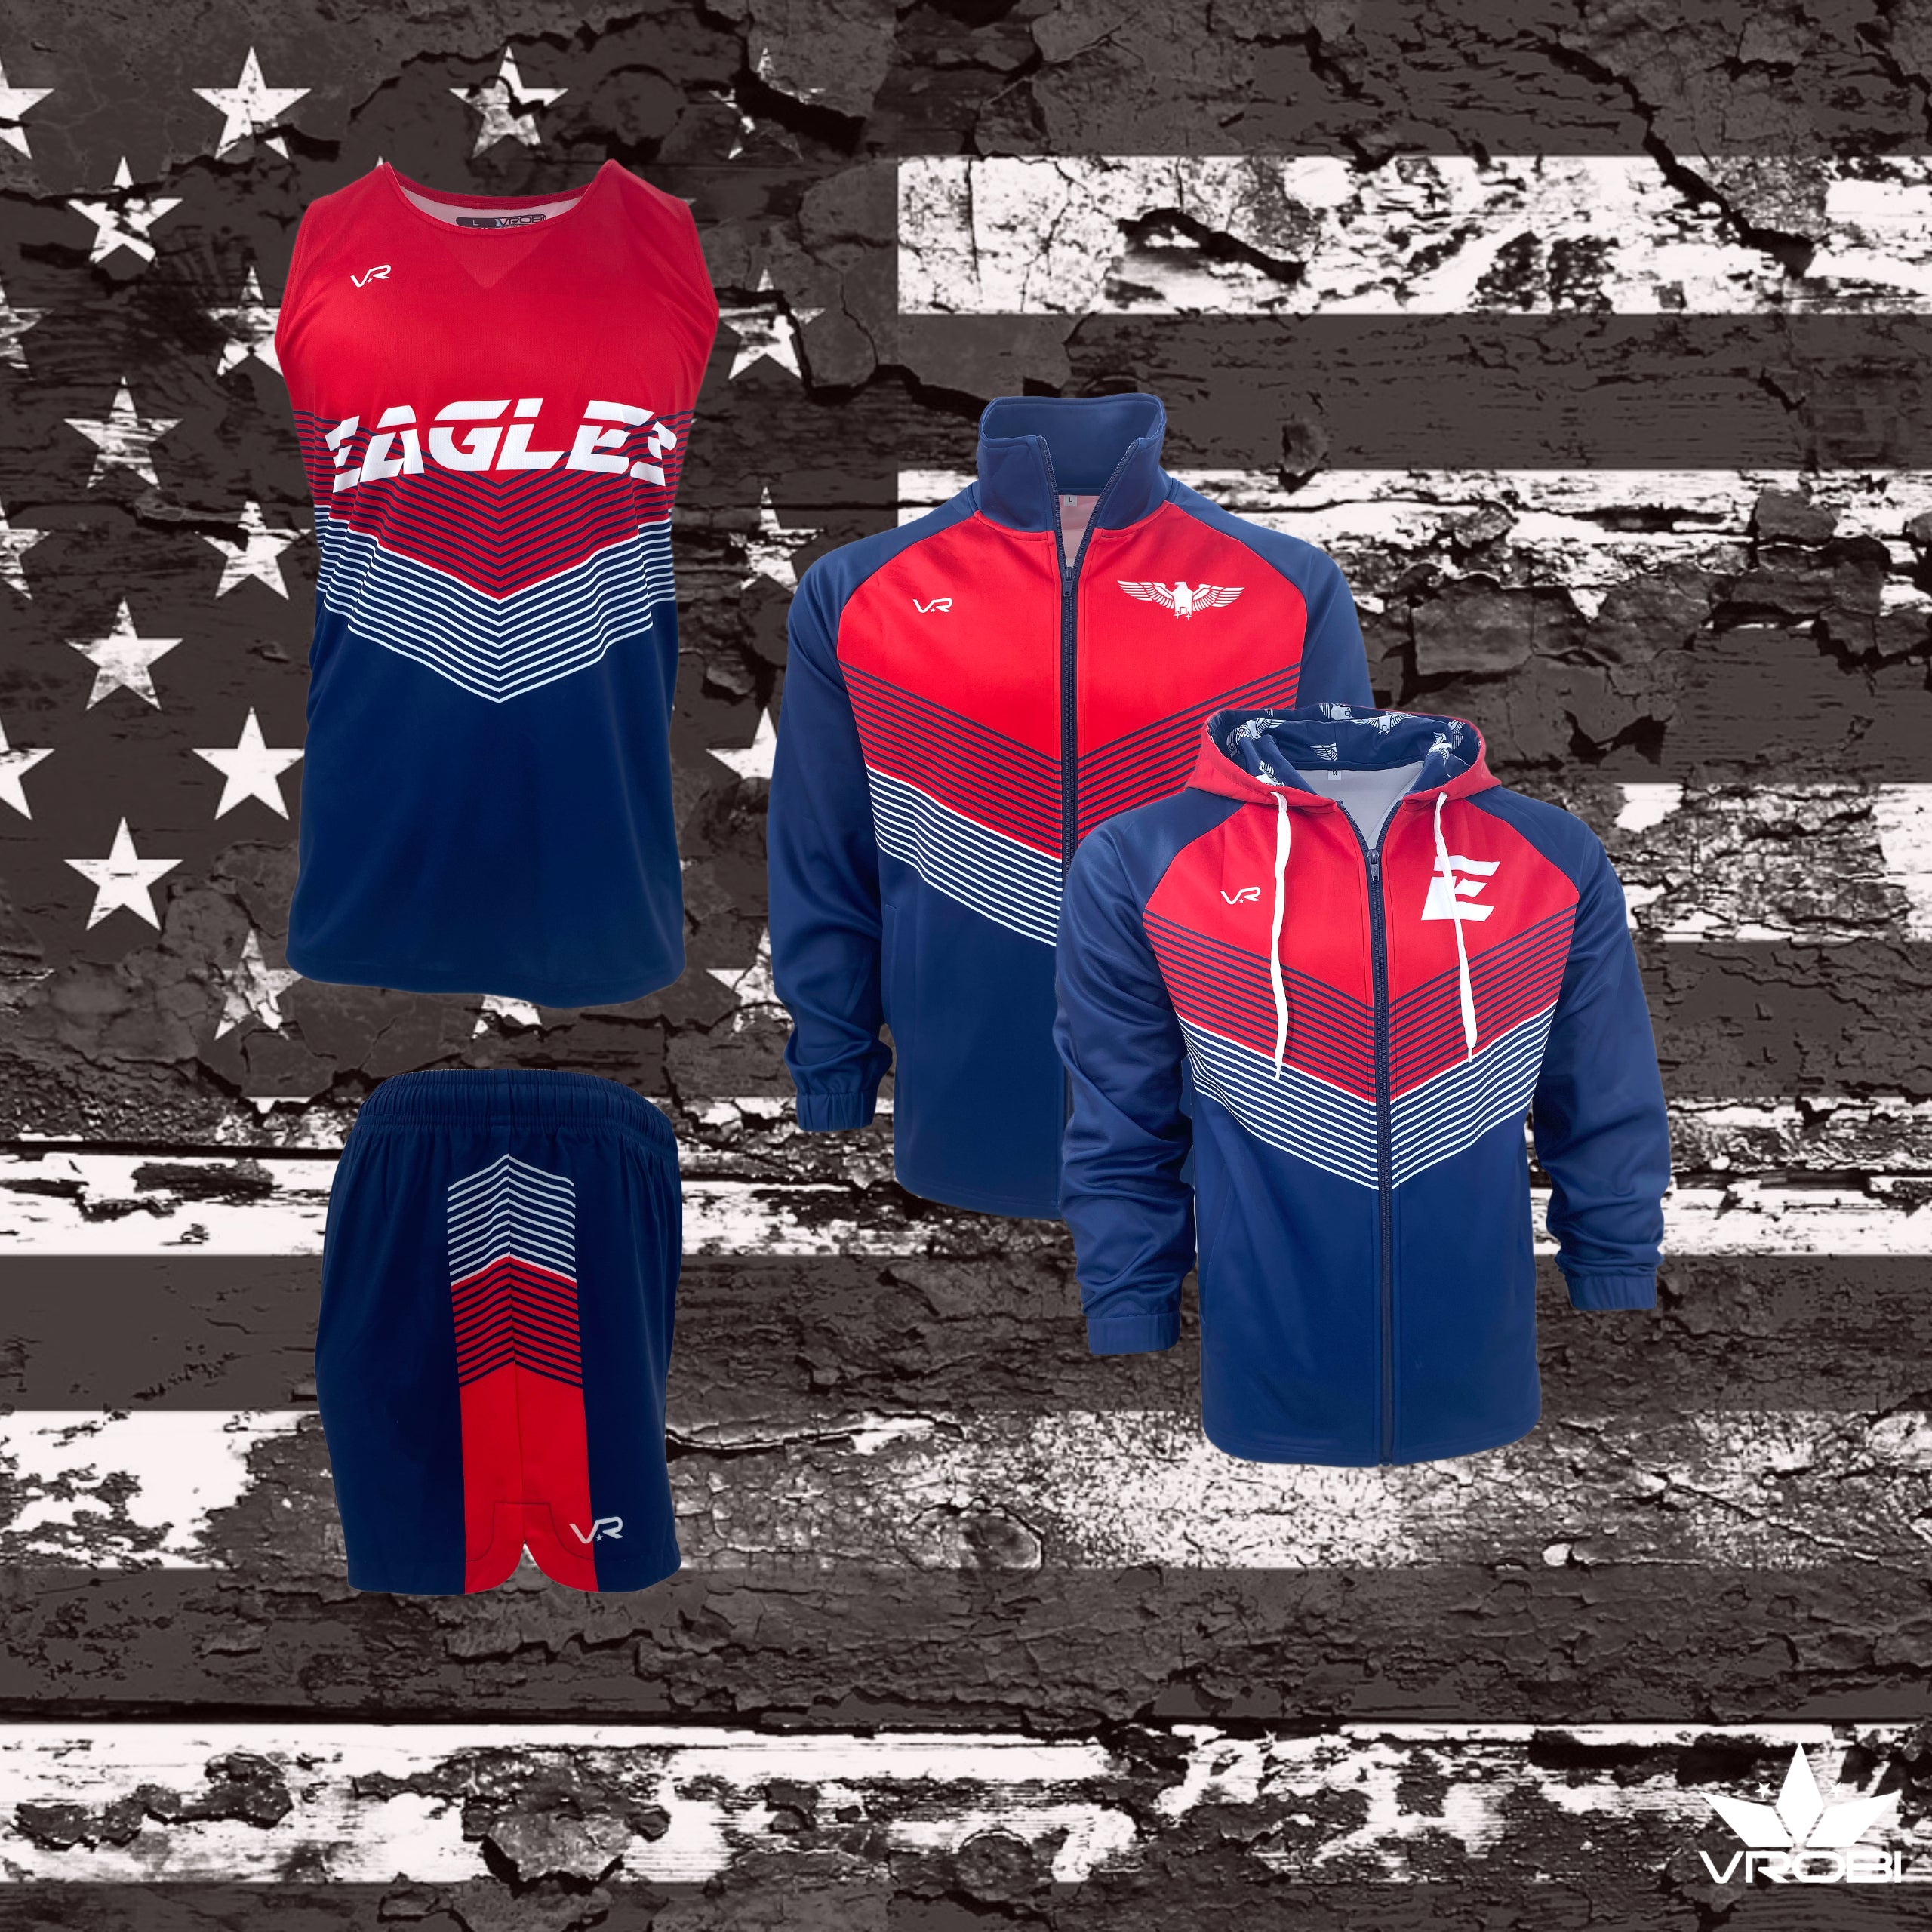 Track Silver Package featuring Jerseys, Shorts and Warmups